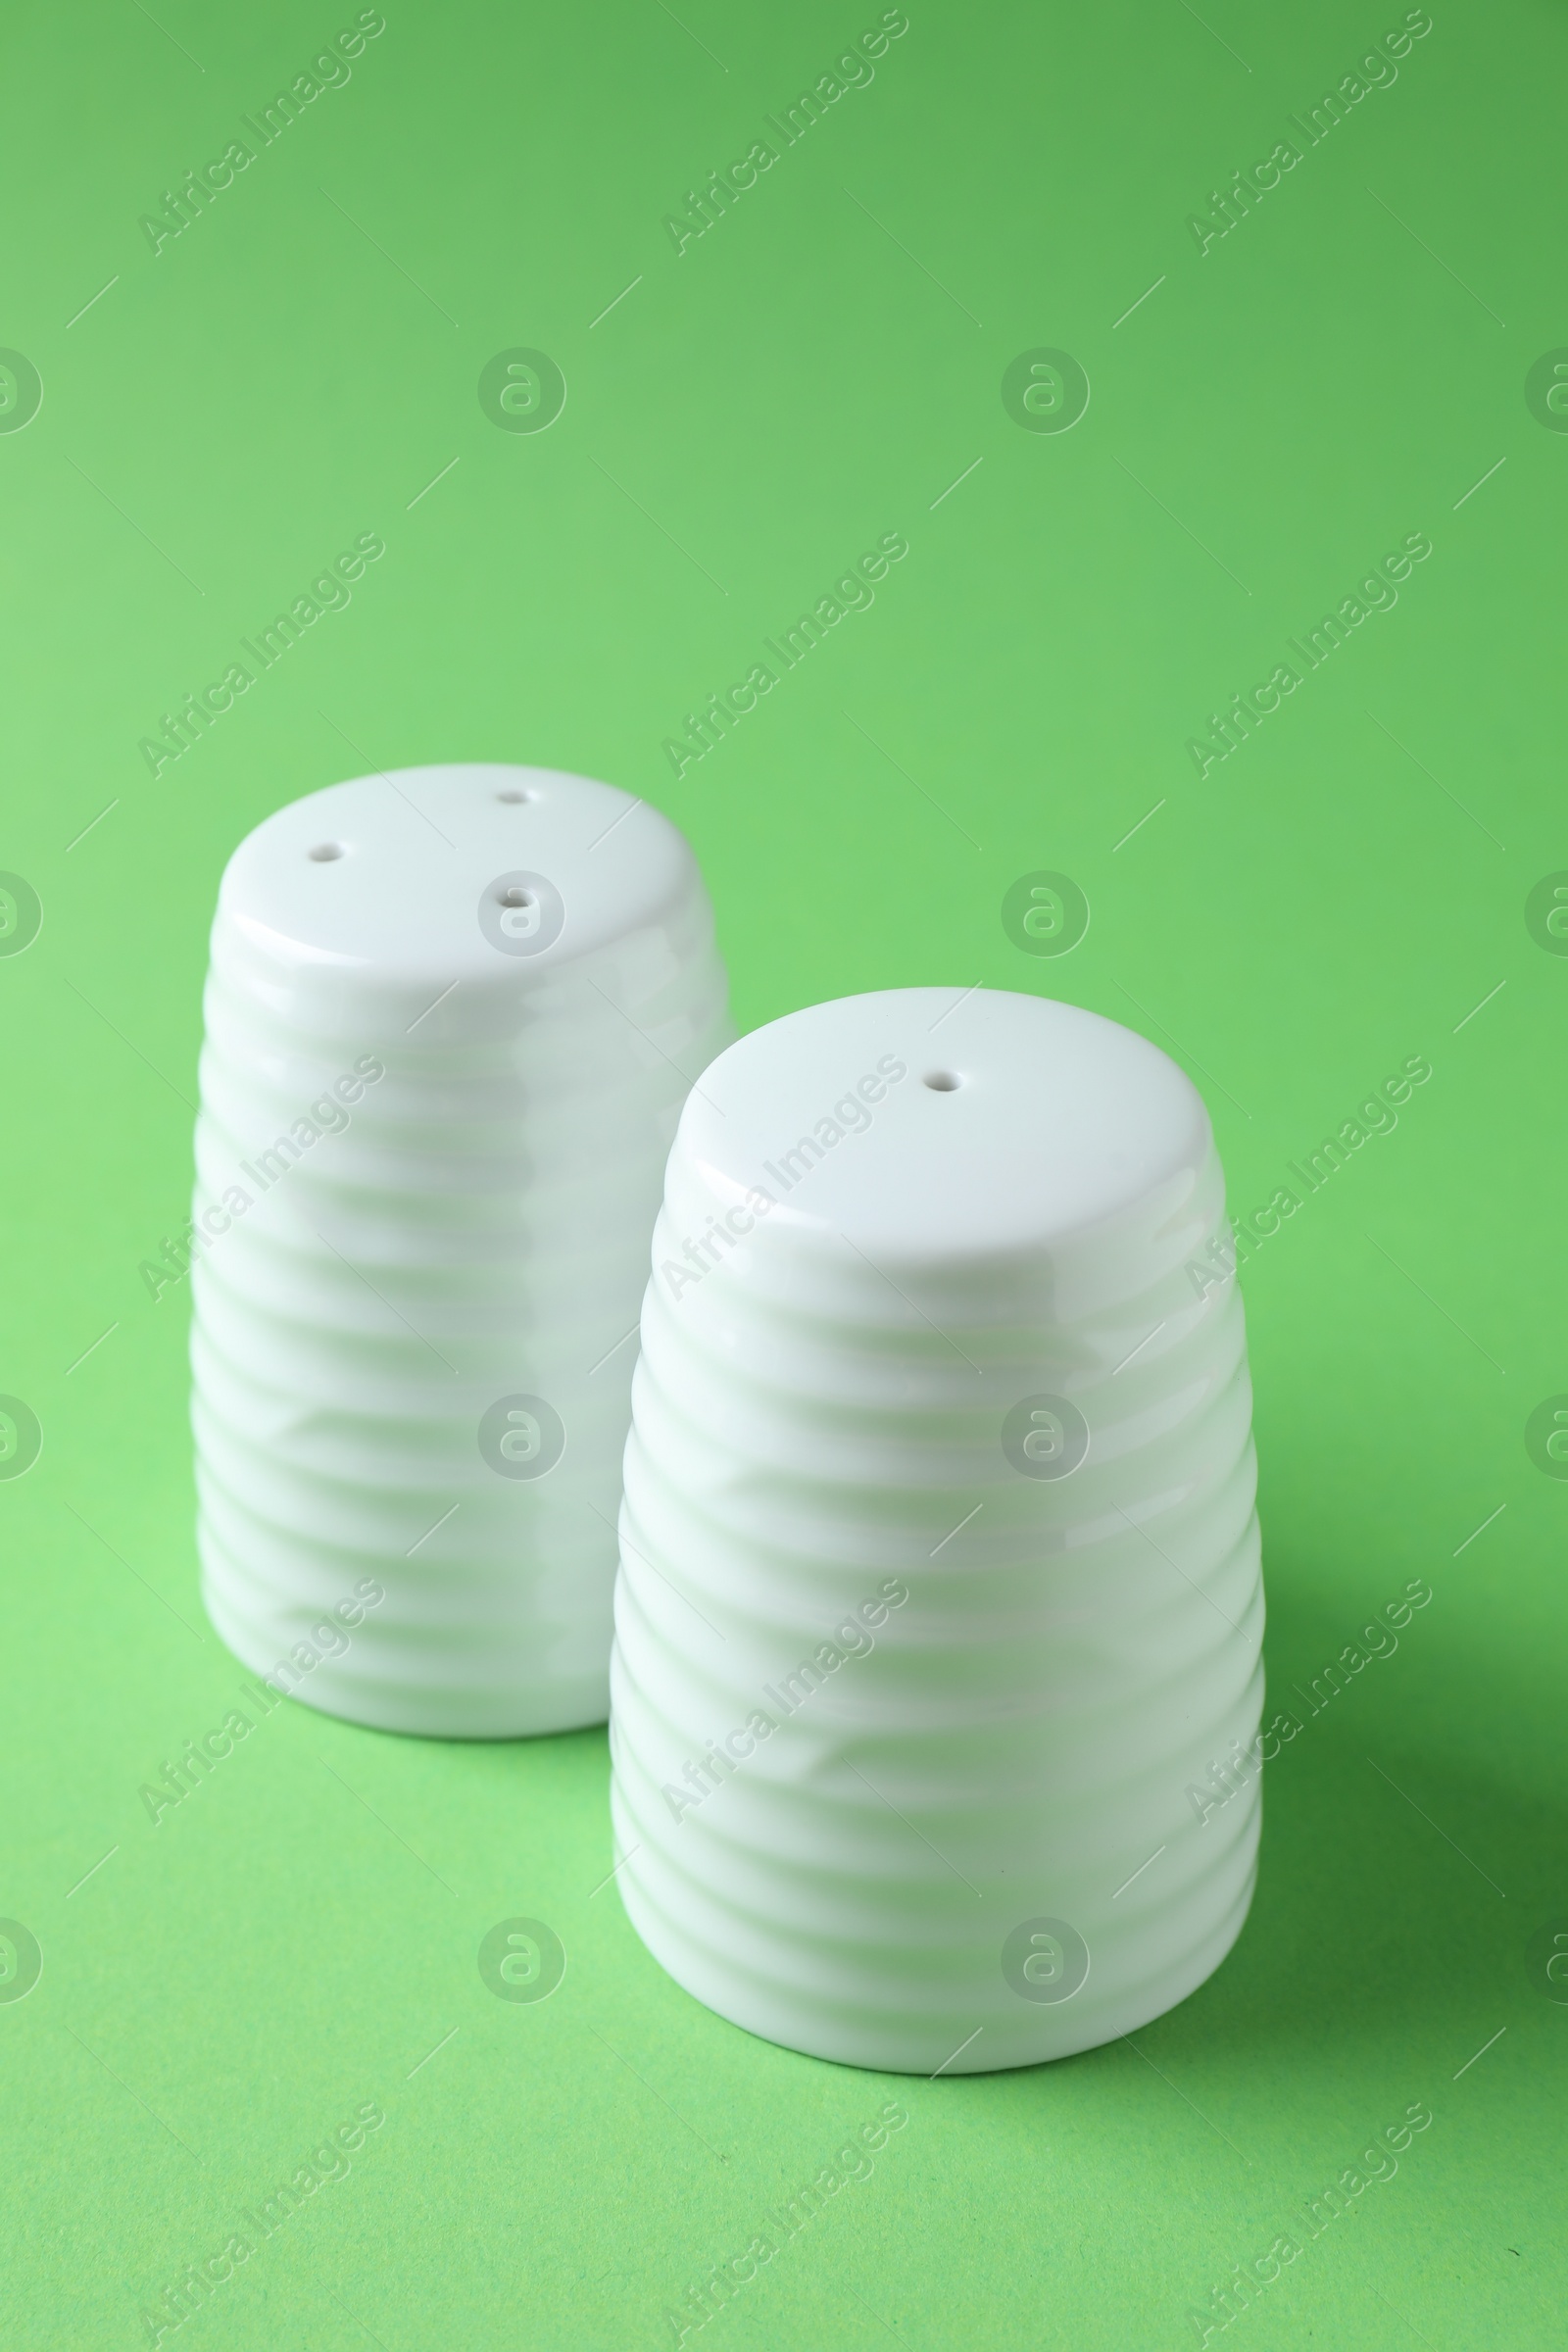 Photo of Salt and pepper shakers on green background